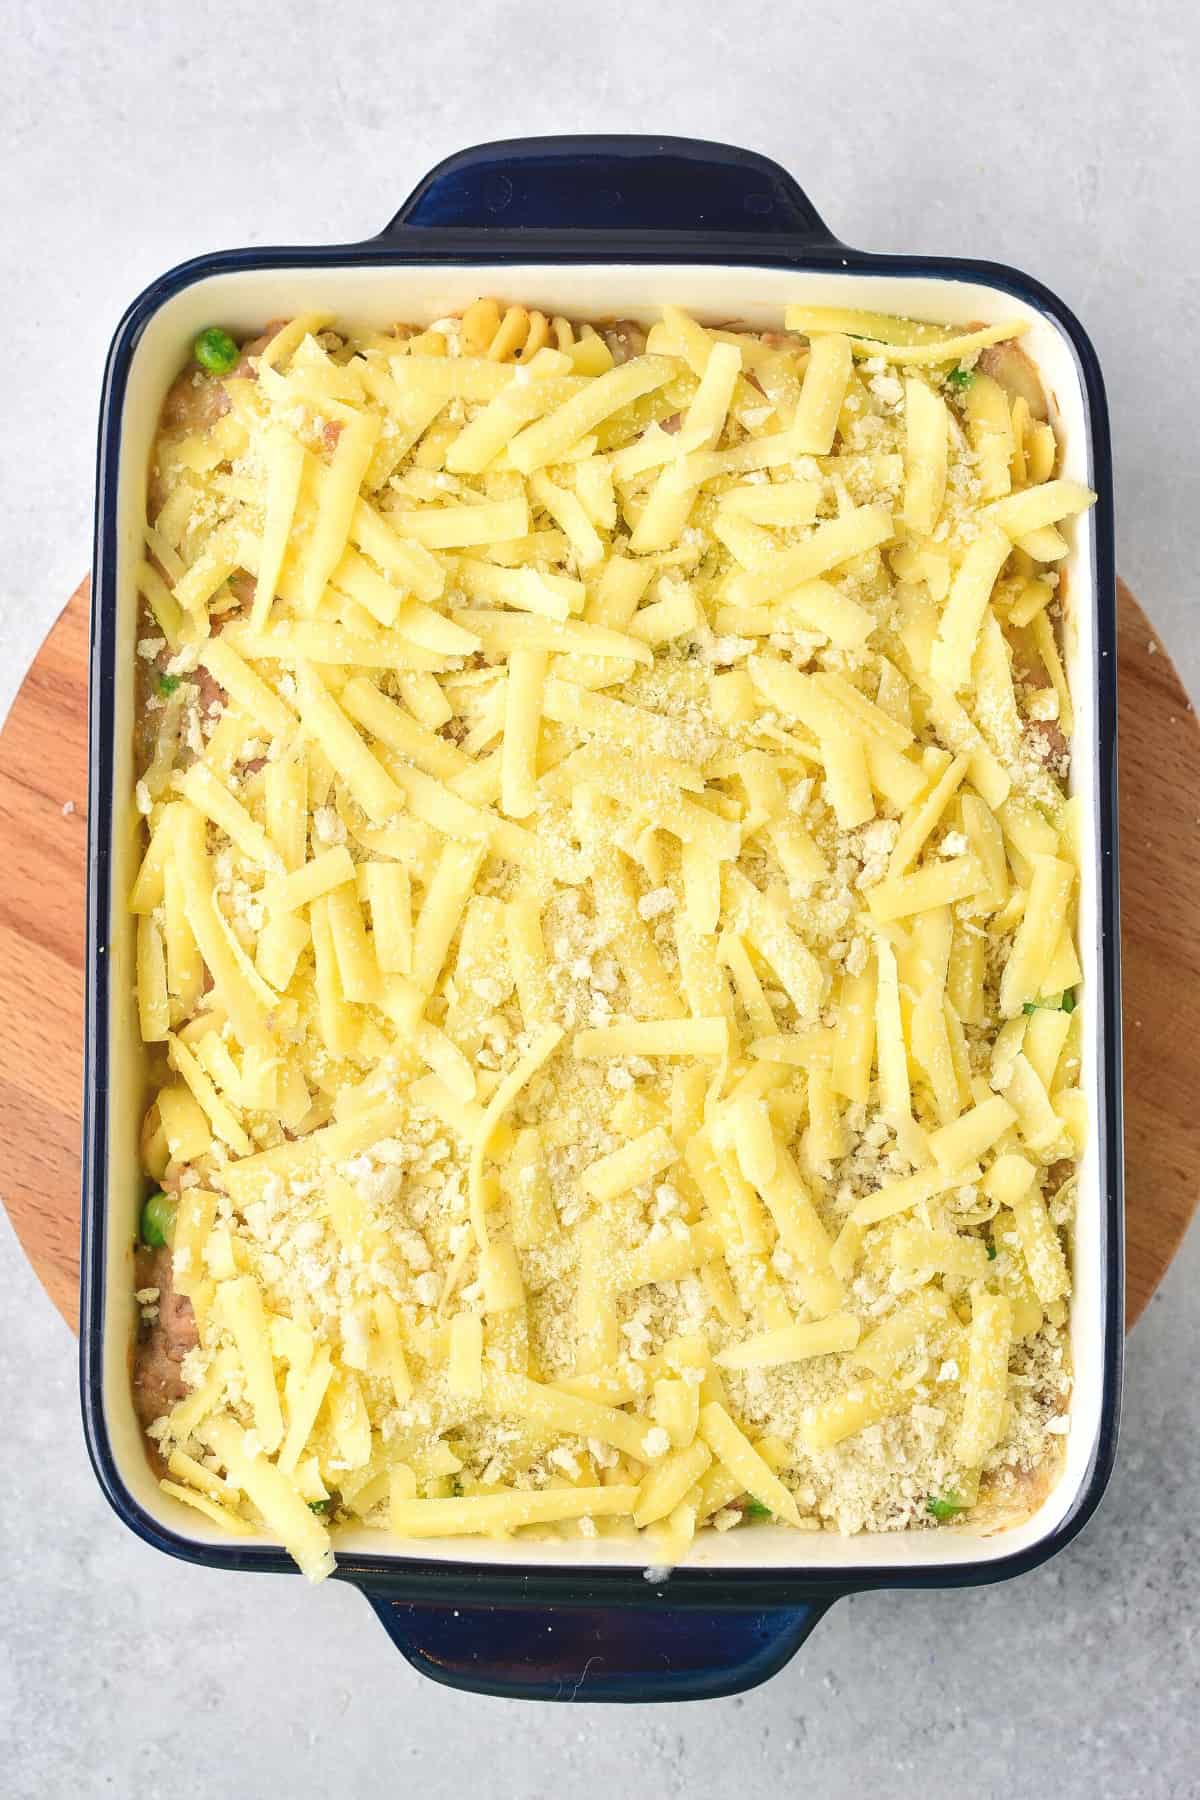 Tuna casserole topped with shredded cheese in baking dish.